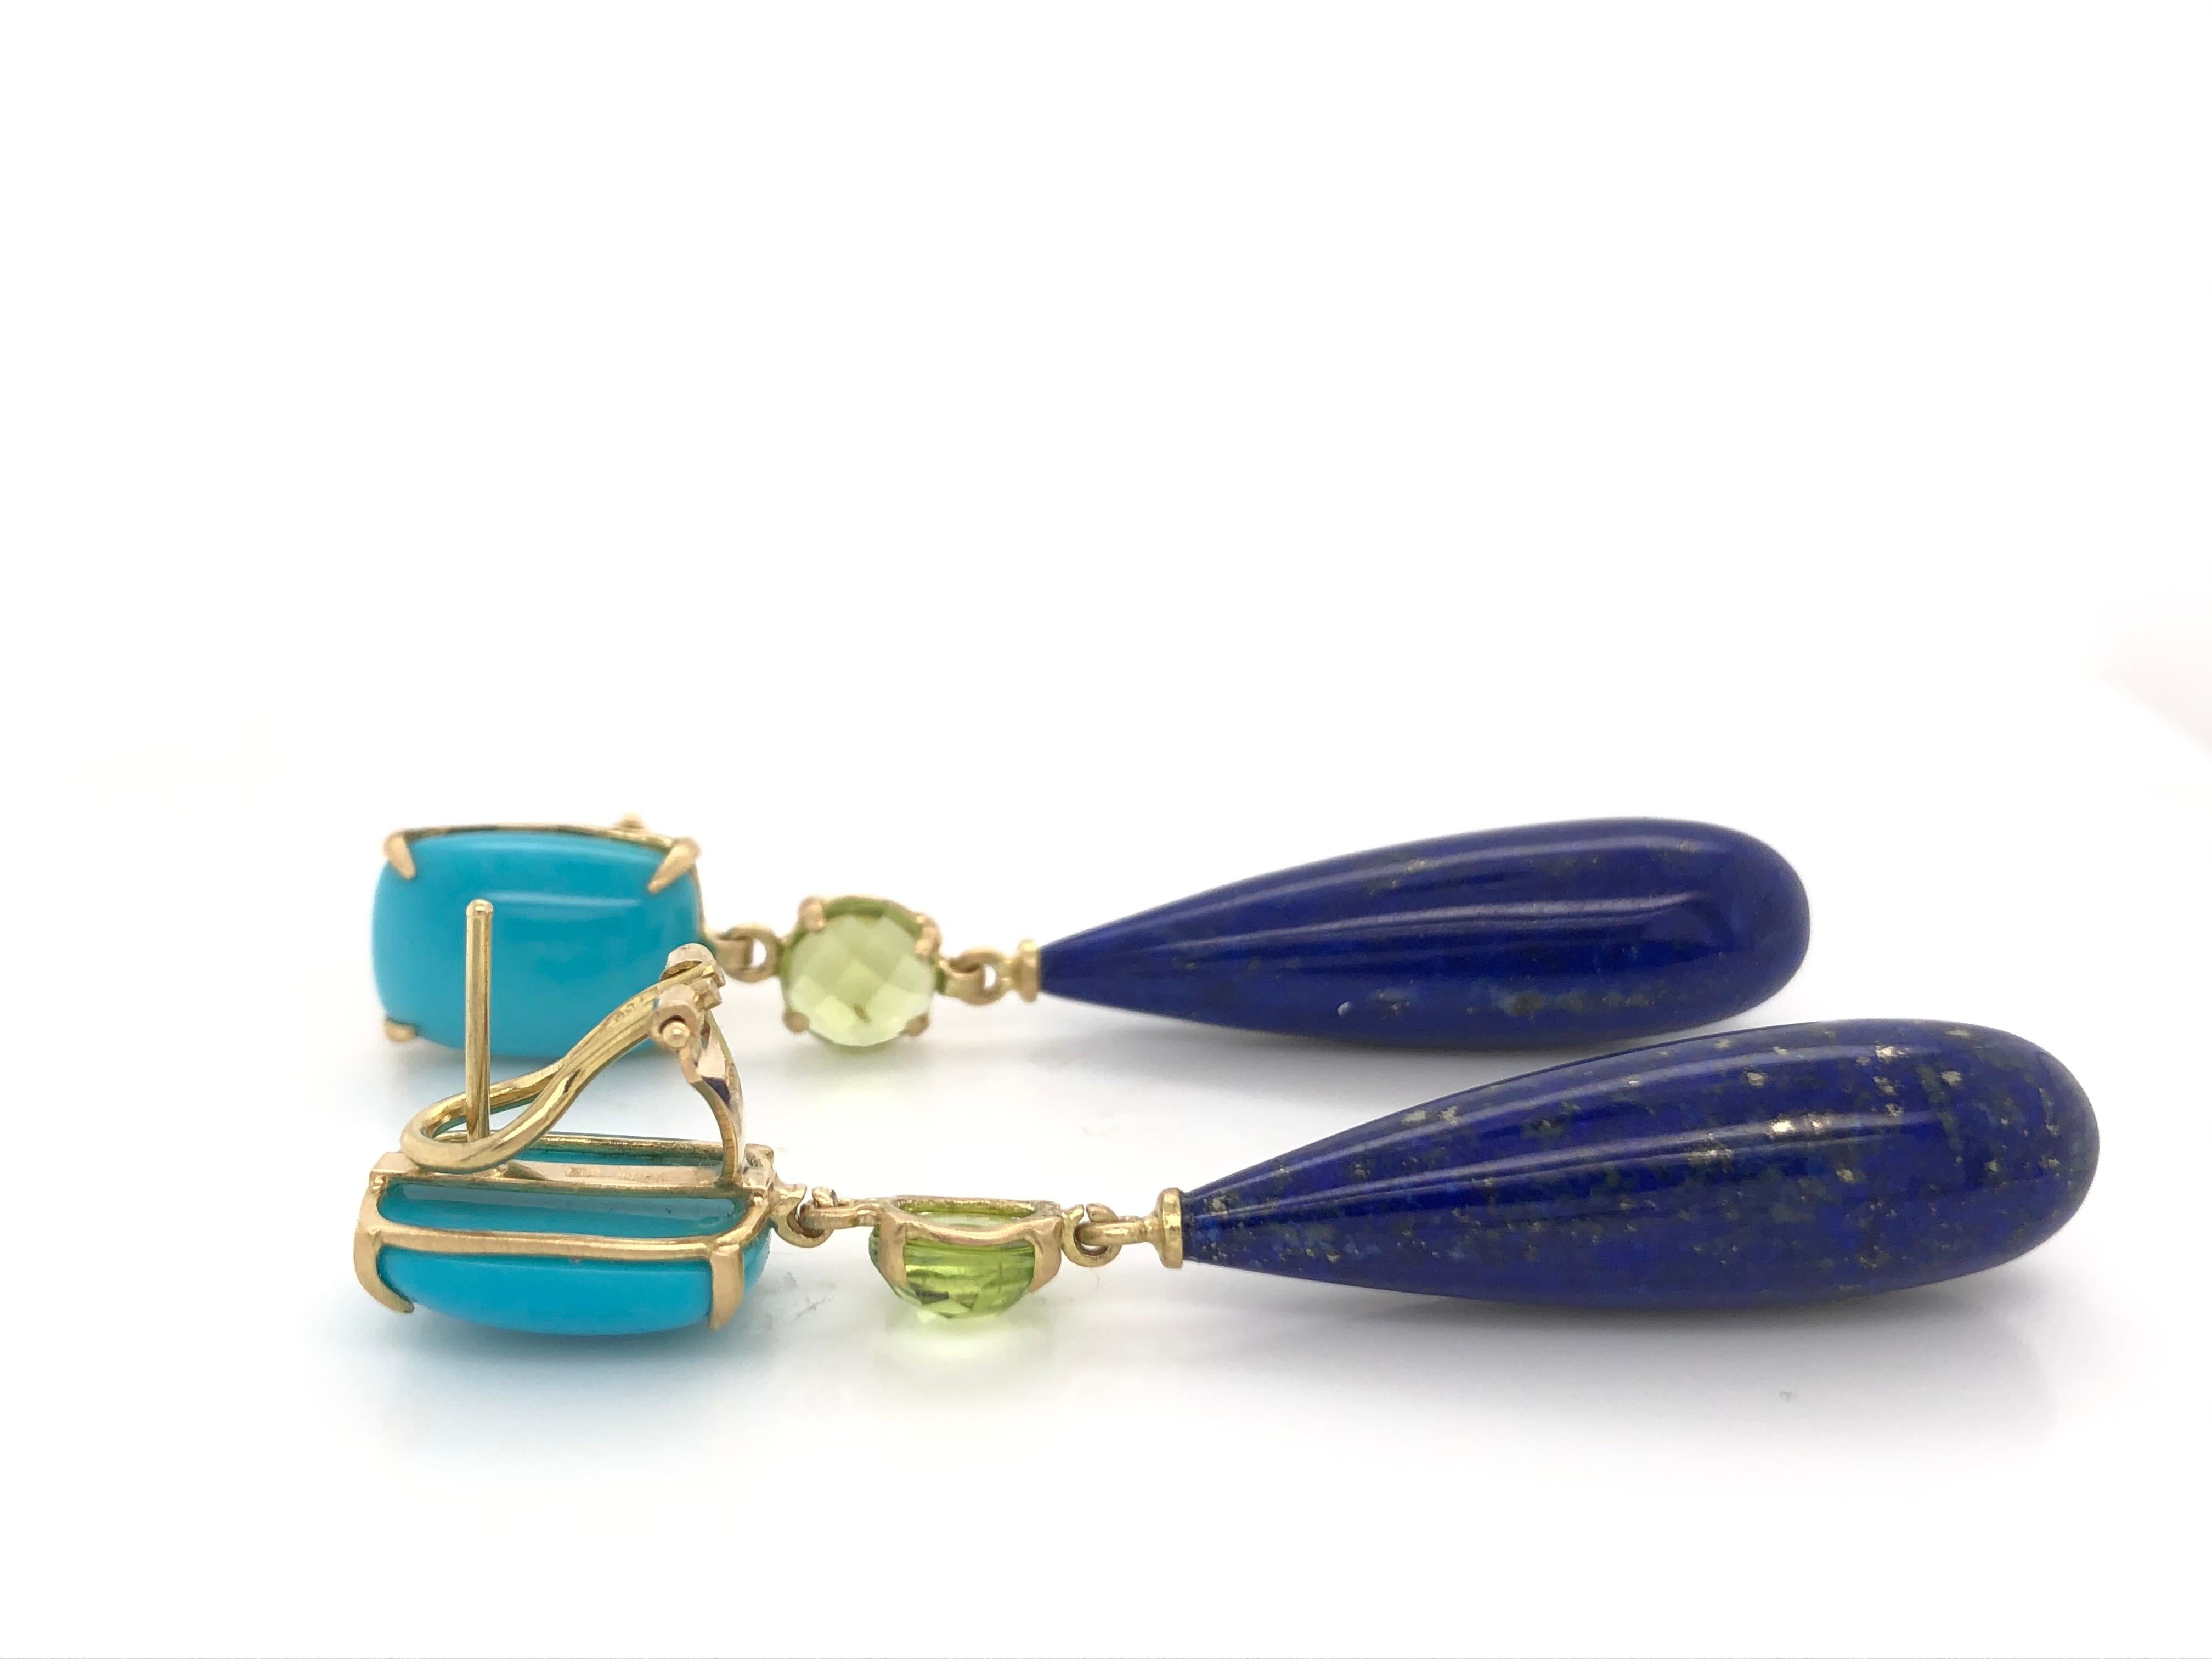 Turquoise, Peridot, Lapis Lazuli On Yellow Gold 18 k Chandelier Earrings 
2 Turquoise Cabochon shape 
2 Peridot Facet Round Shape 
2 Lapis Lazuli Drop Shape 
Yellow Gold 18 k 
Two Types Of Clasp (Spike and Clips)